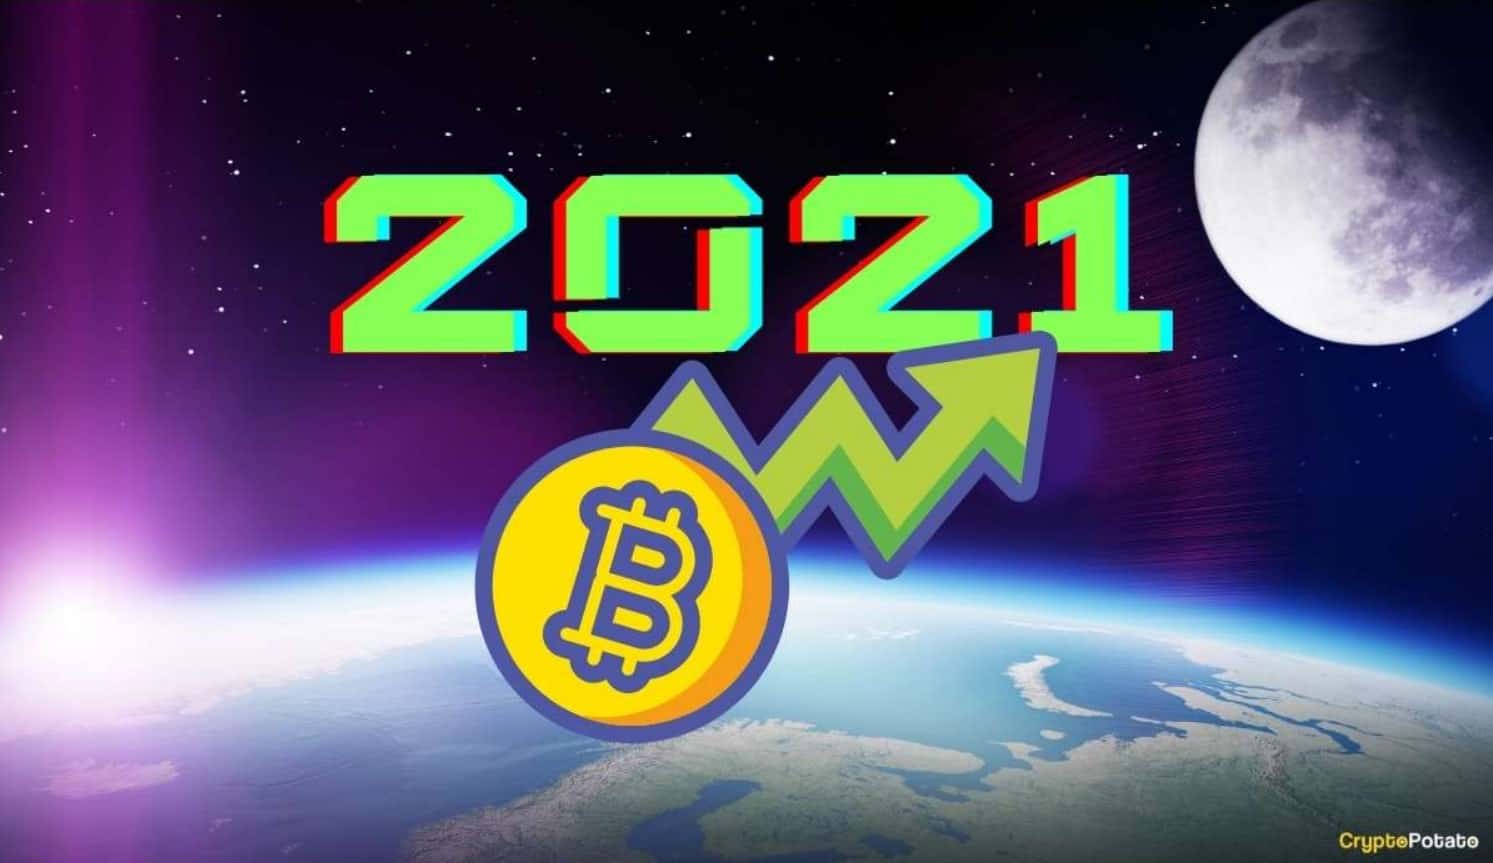 Will-bitcoin-price-rally-continue-in-2021?-8-key-considerations